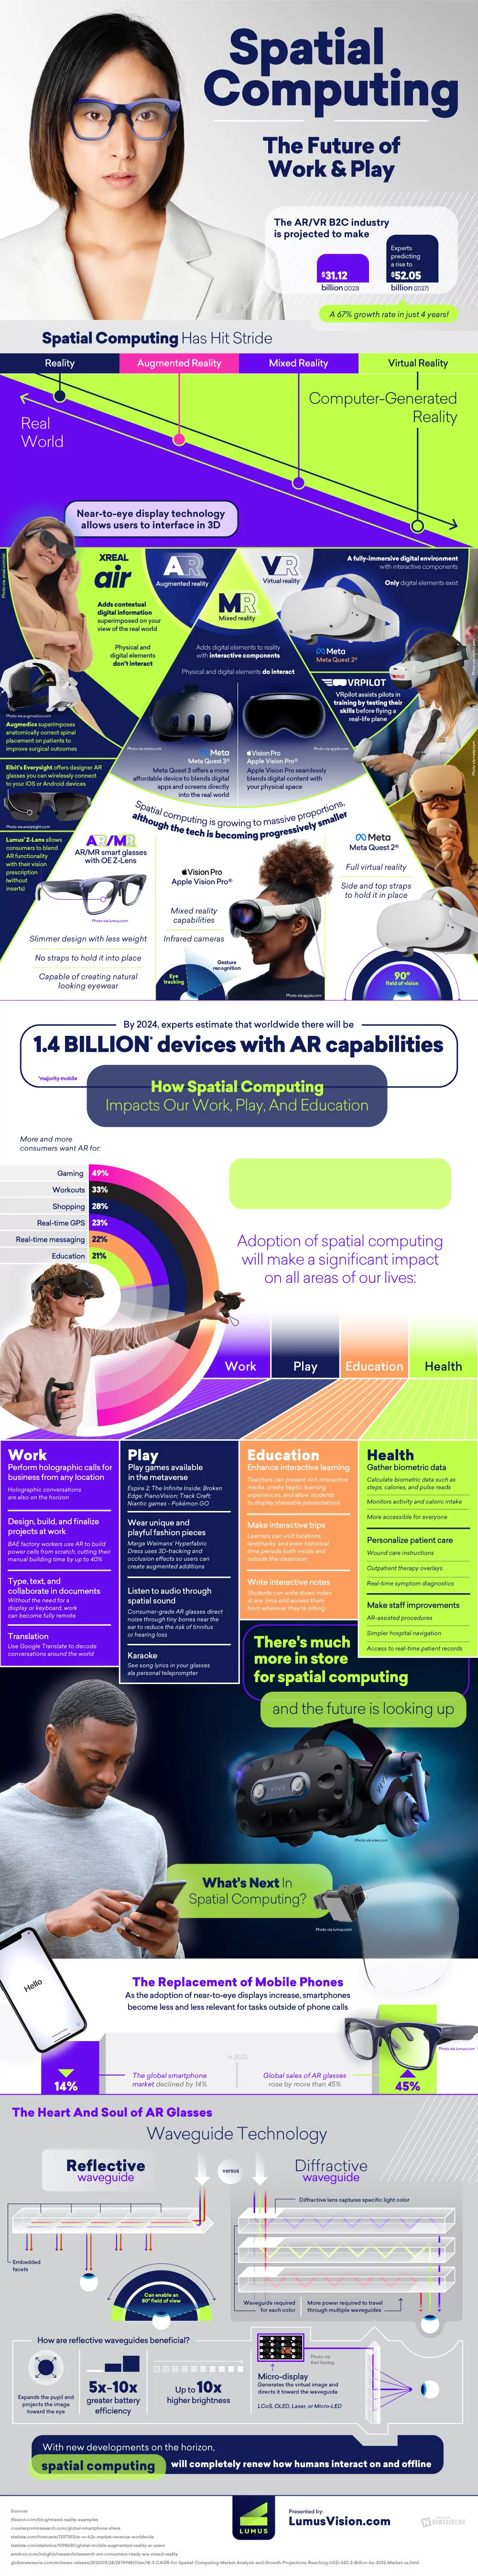 Spatial Computing: The Future of Work & Play - Infographic